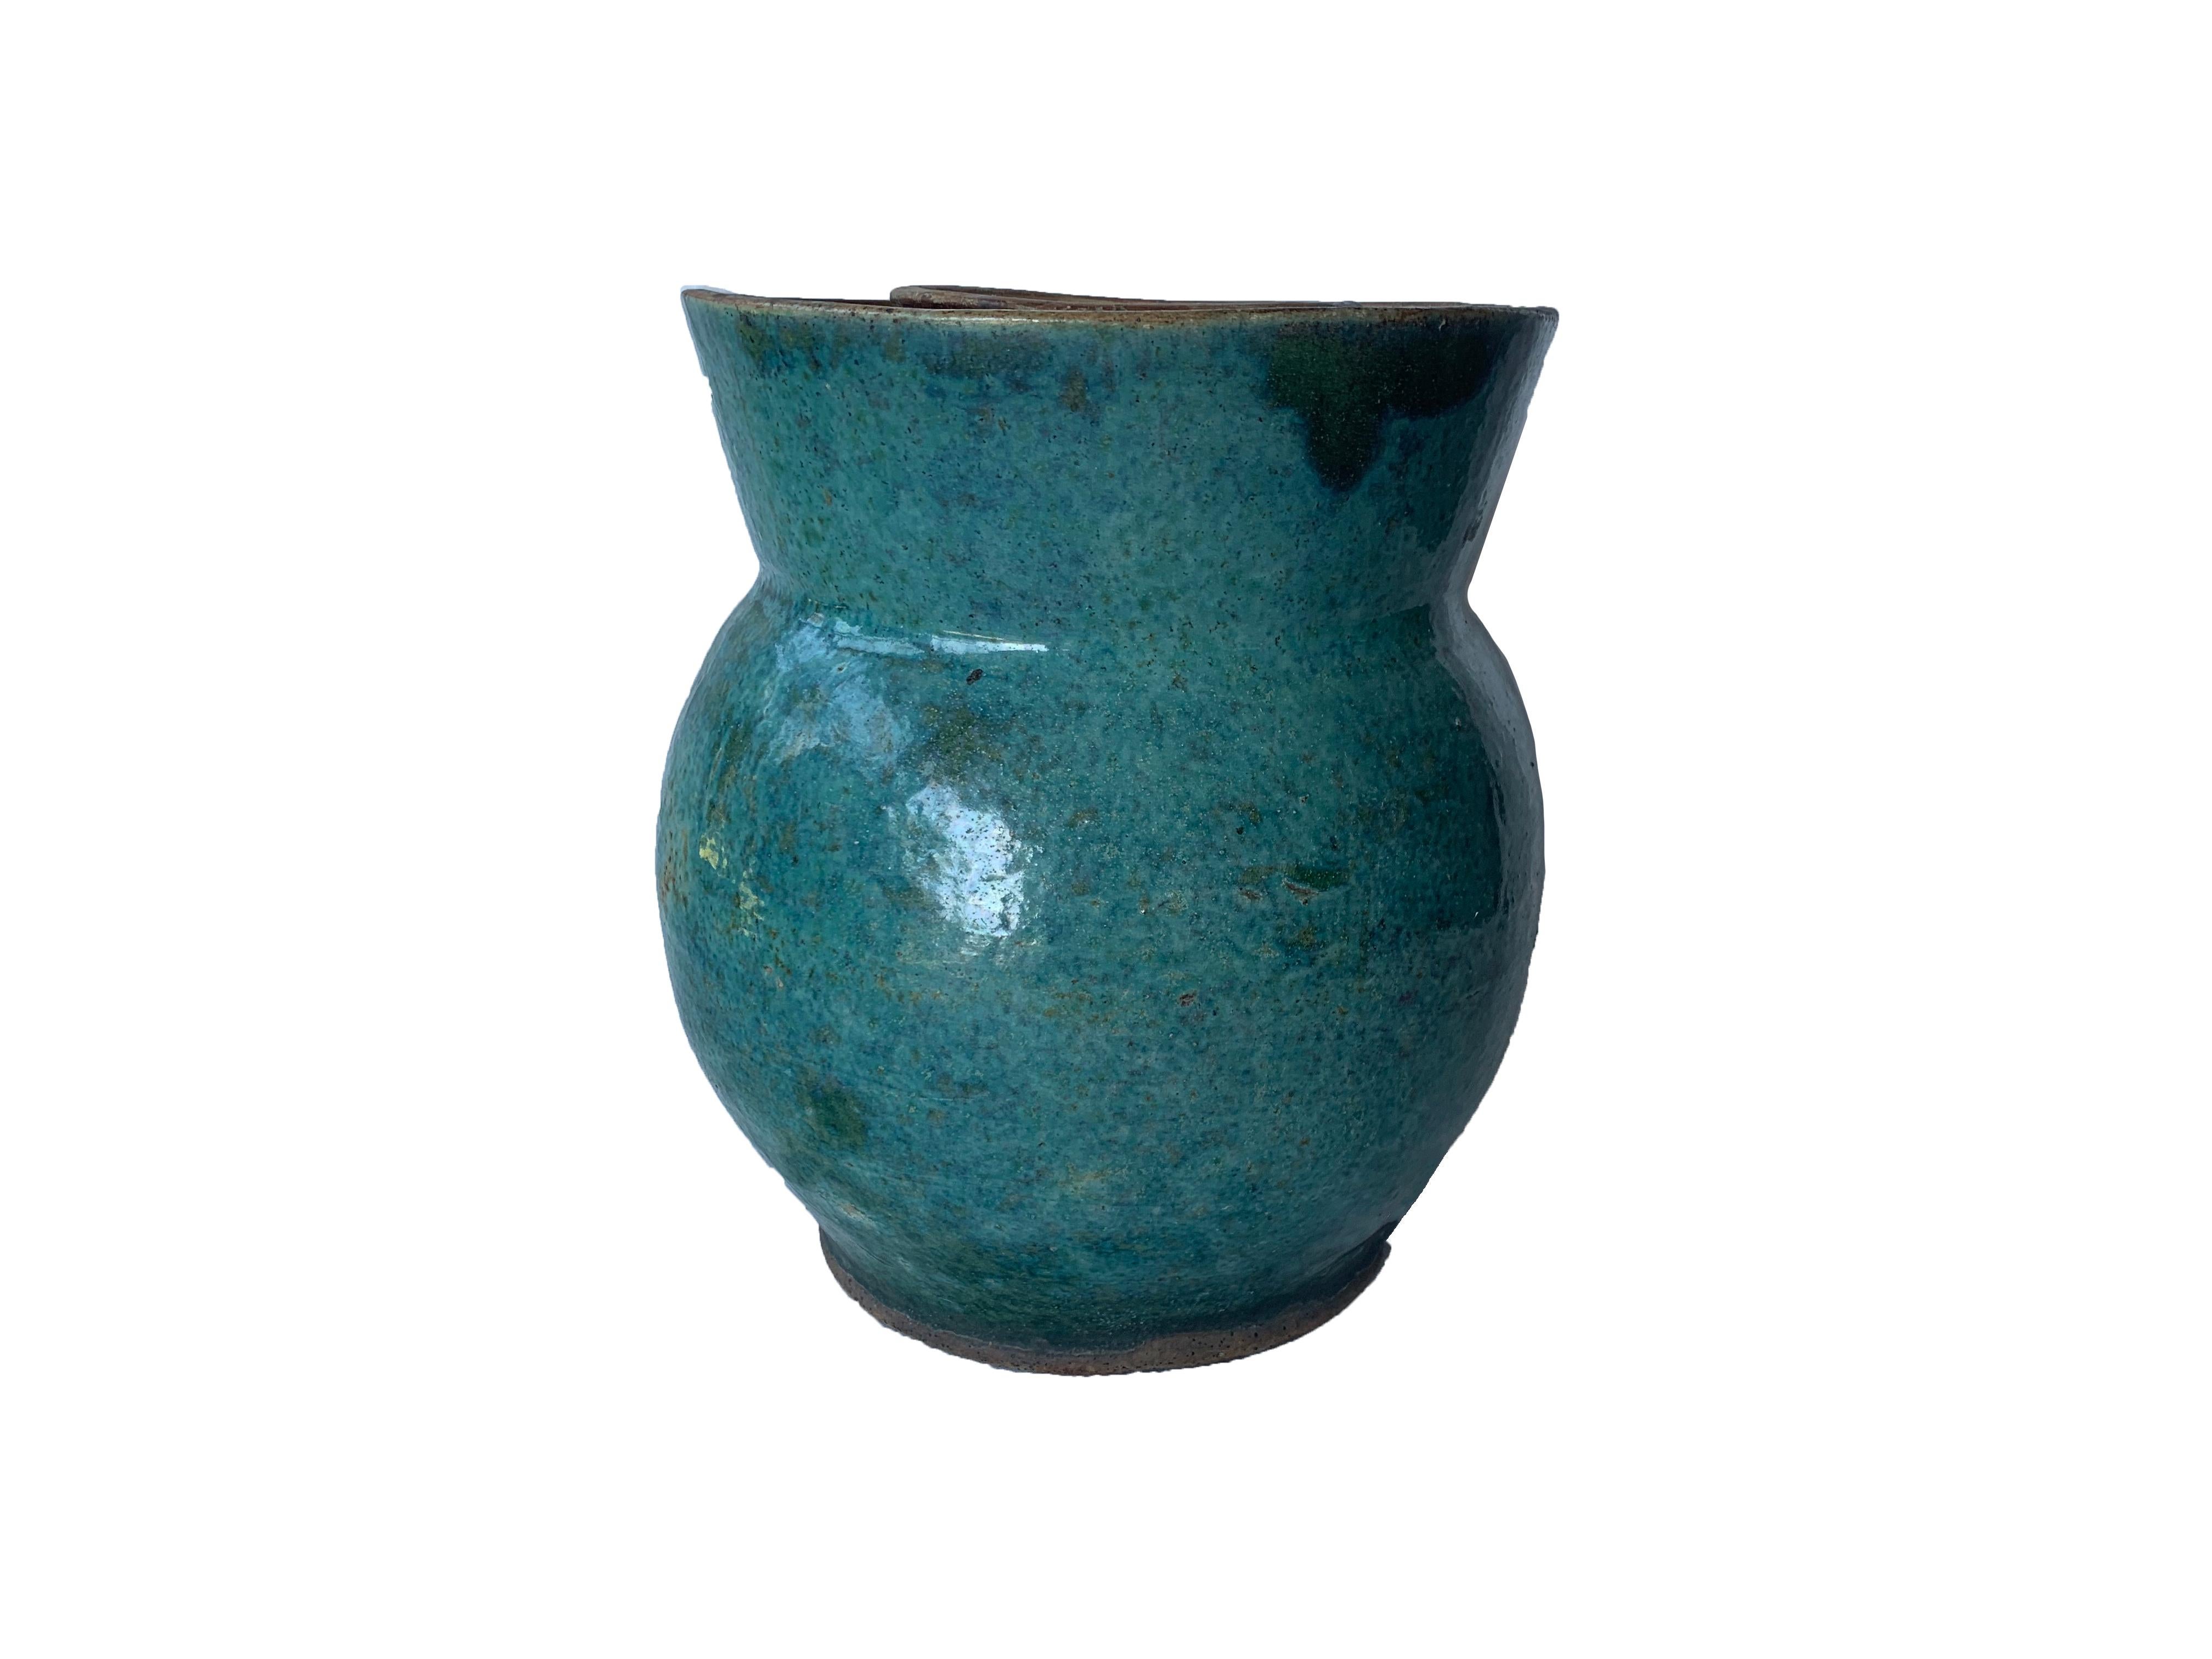 This early 20th century Shiwan fermentation jar features a sunken rim where water would have been filled (forming a barrier) to prevent insects and other pests from climbing into the jar's opening and eating its contents. It features a green-glaze